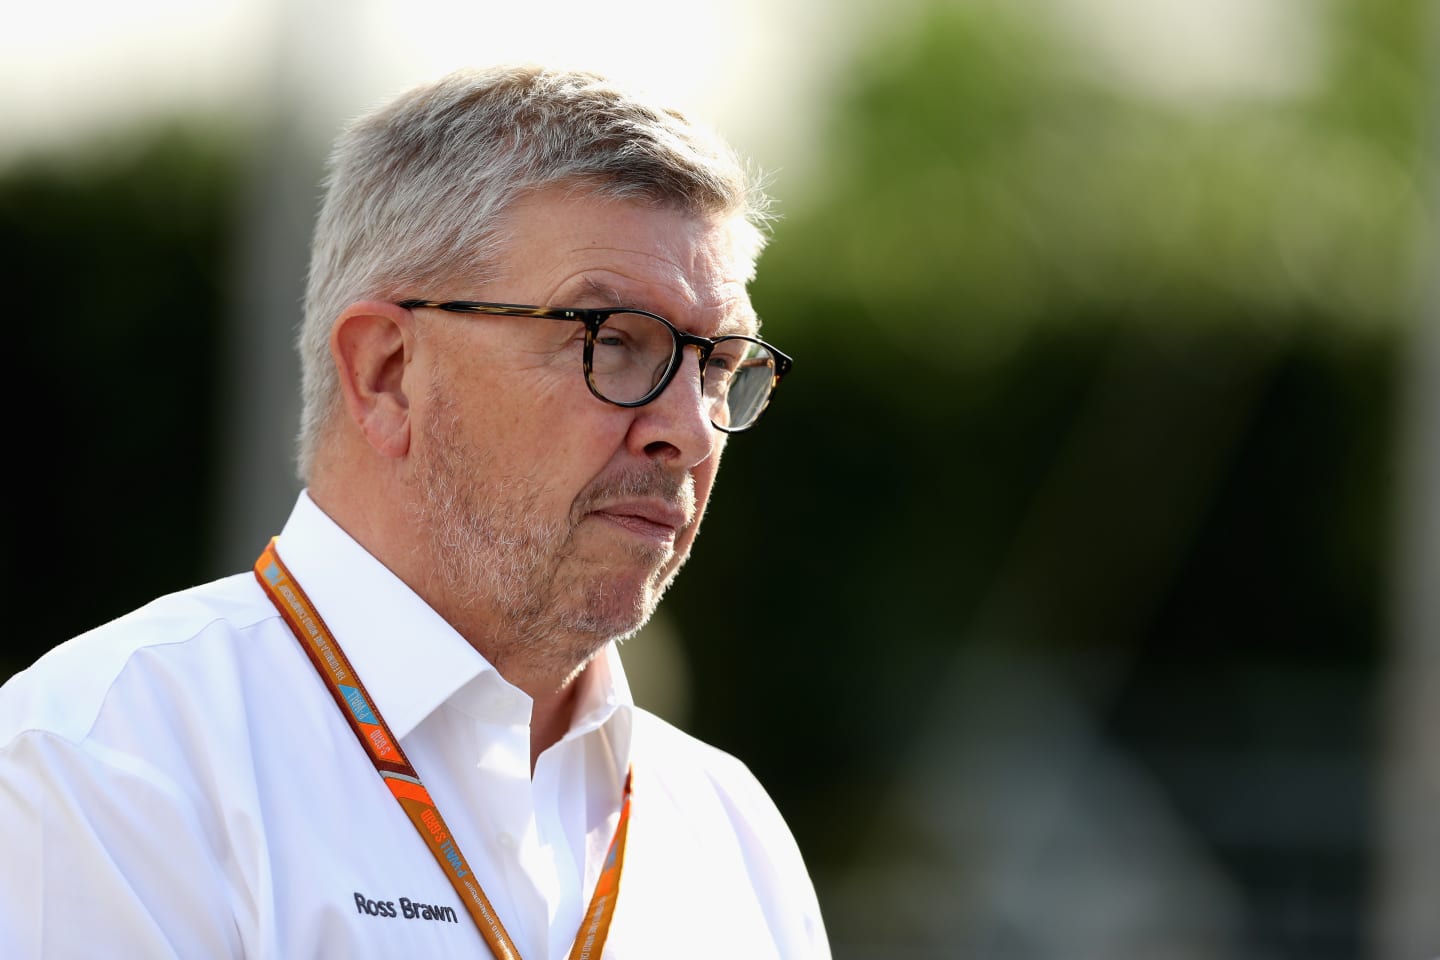 MONZA, ITALY - SEPTEMBER 01:  Ross Brawn, Managing Director (Sporting) of the Formula One Group